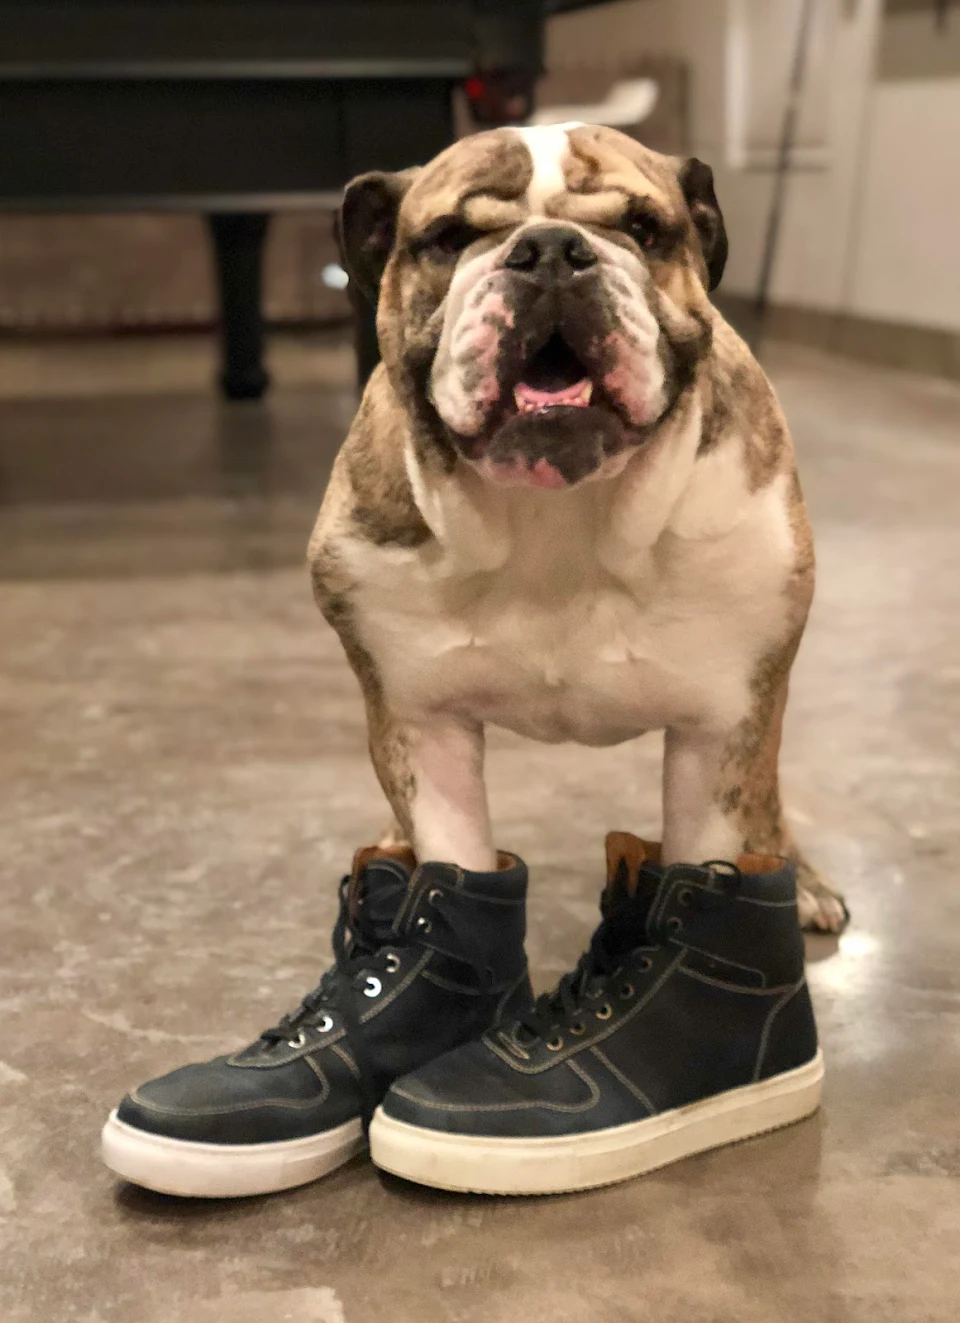 Just a bully wearing my boyfriend’s shoes